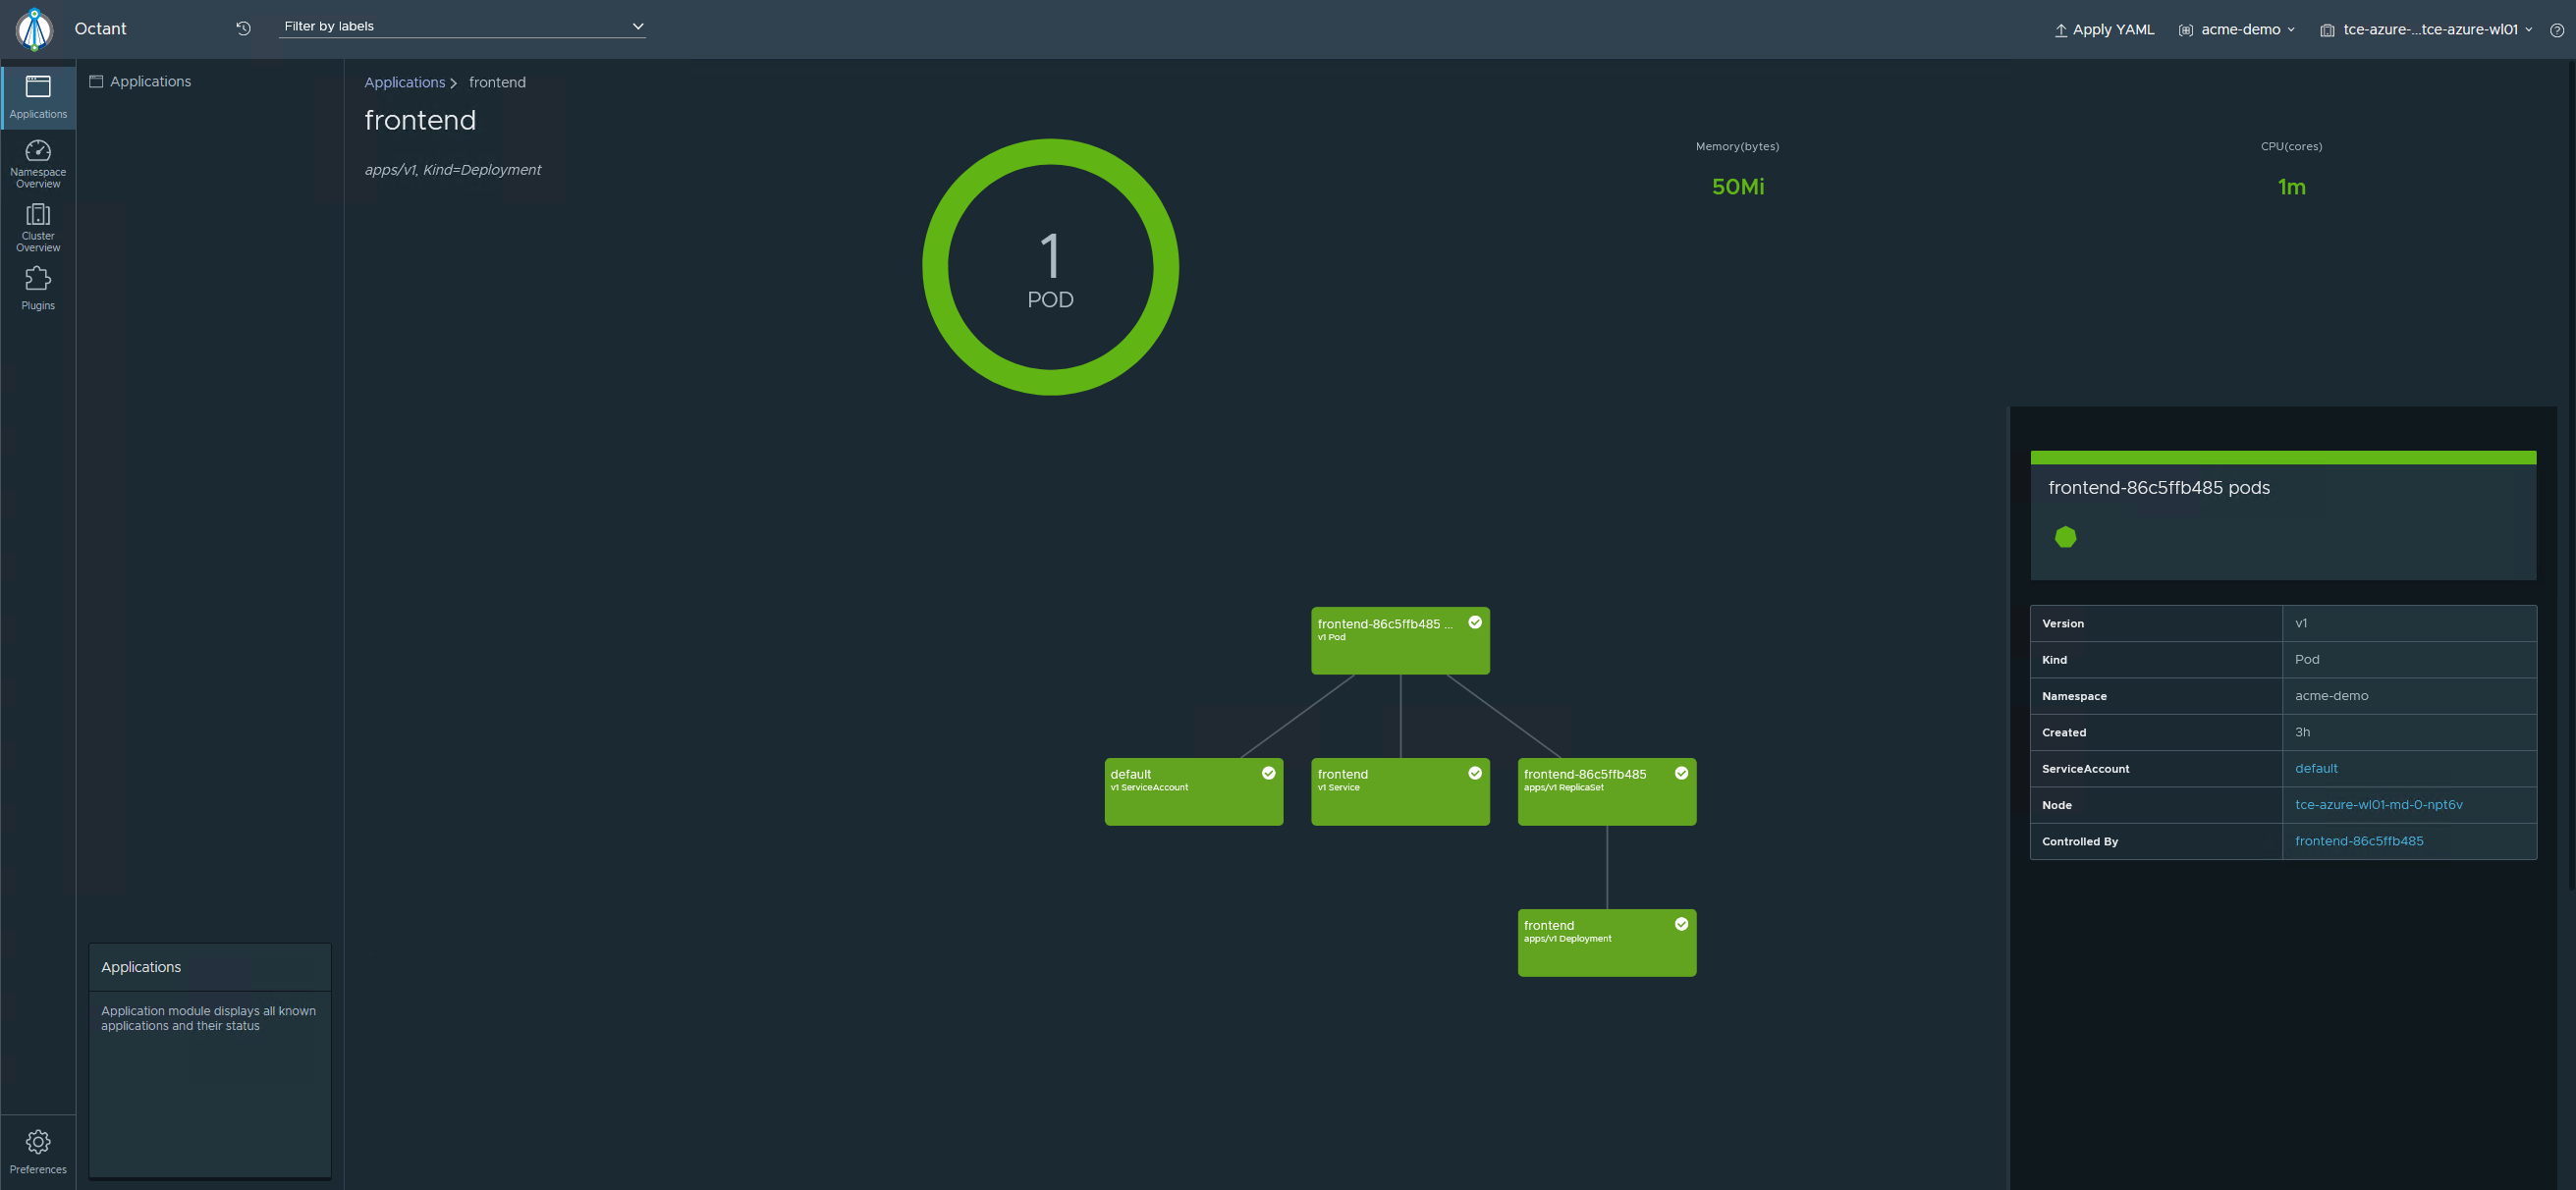 Octant Frontend overview screen